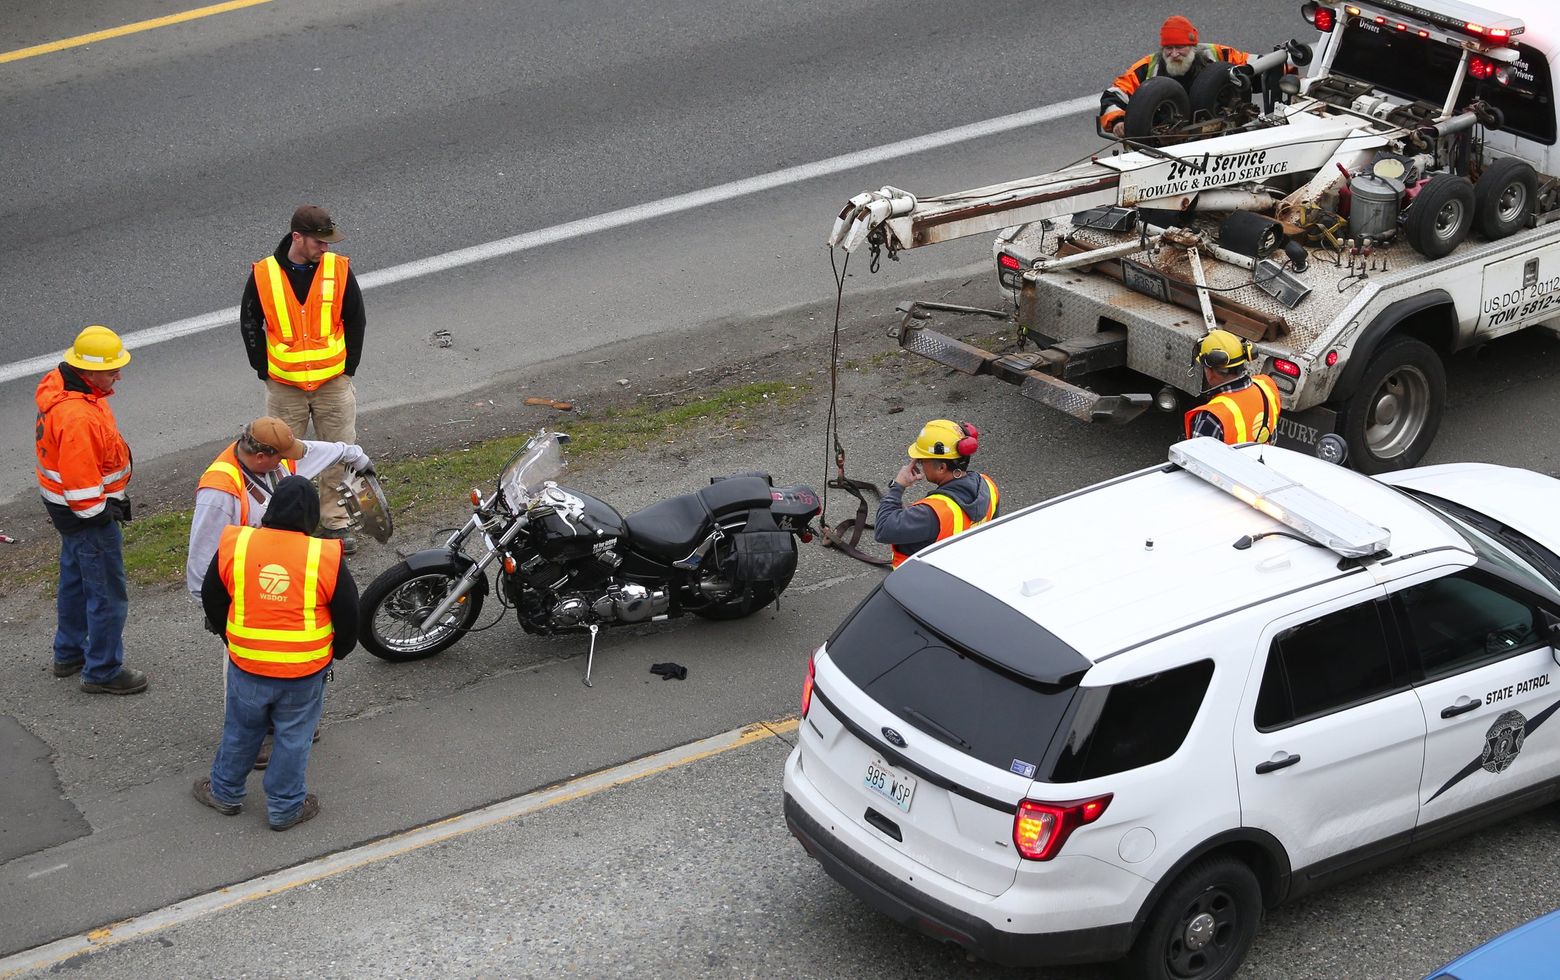 How Many Motorcycle Accidents in Washington State?